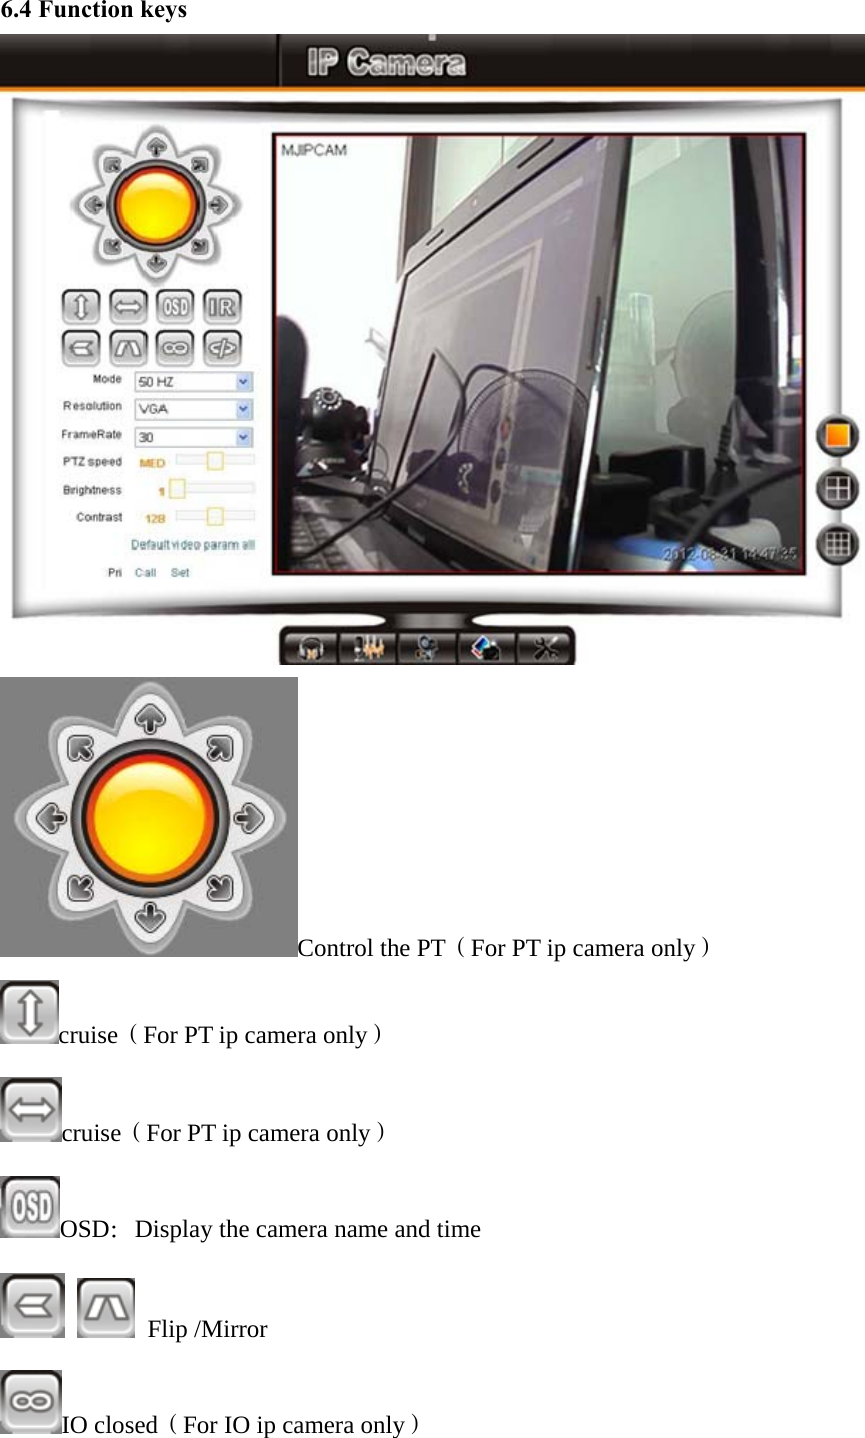   6.4 Function keys  Control the PT（For PT ip camera only） cruise（For PT ip camera only） cruise（For PT ip camera only） OSD：Display the camera name and time   Flip /Mirror IO closed（For IO ip camera only） 